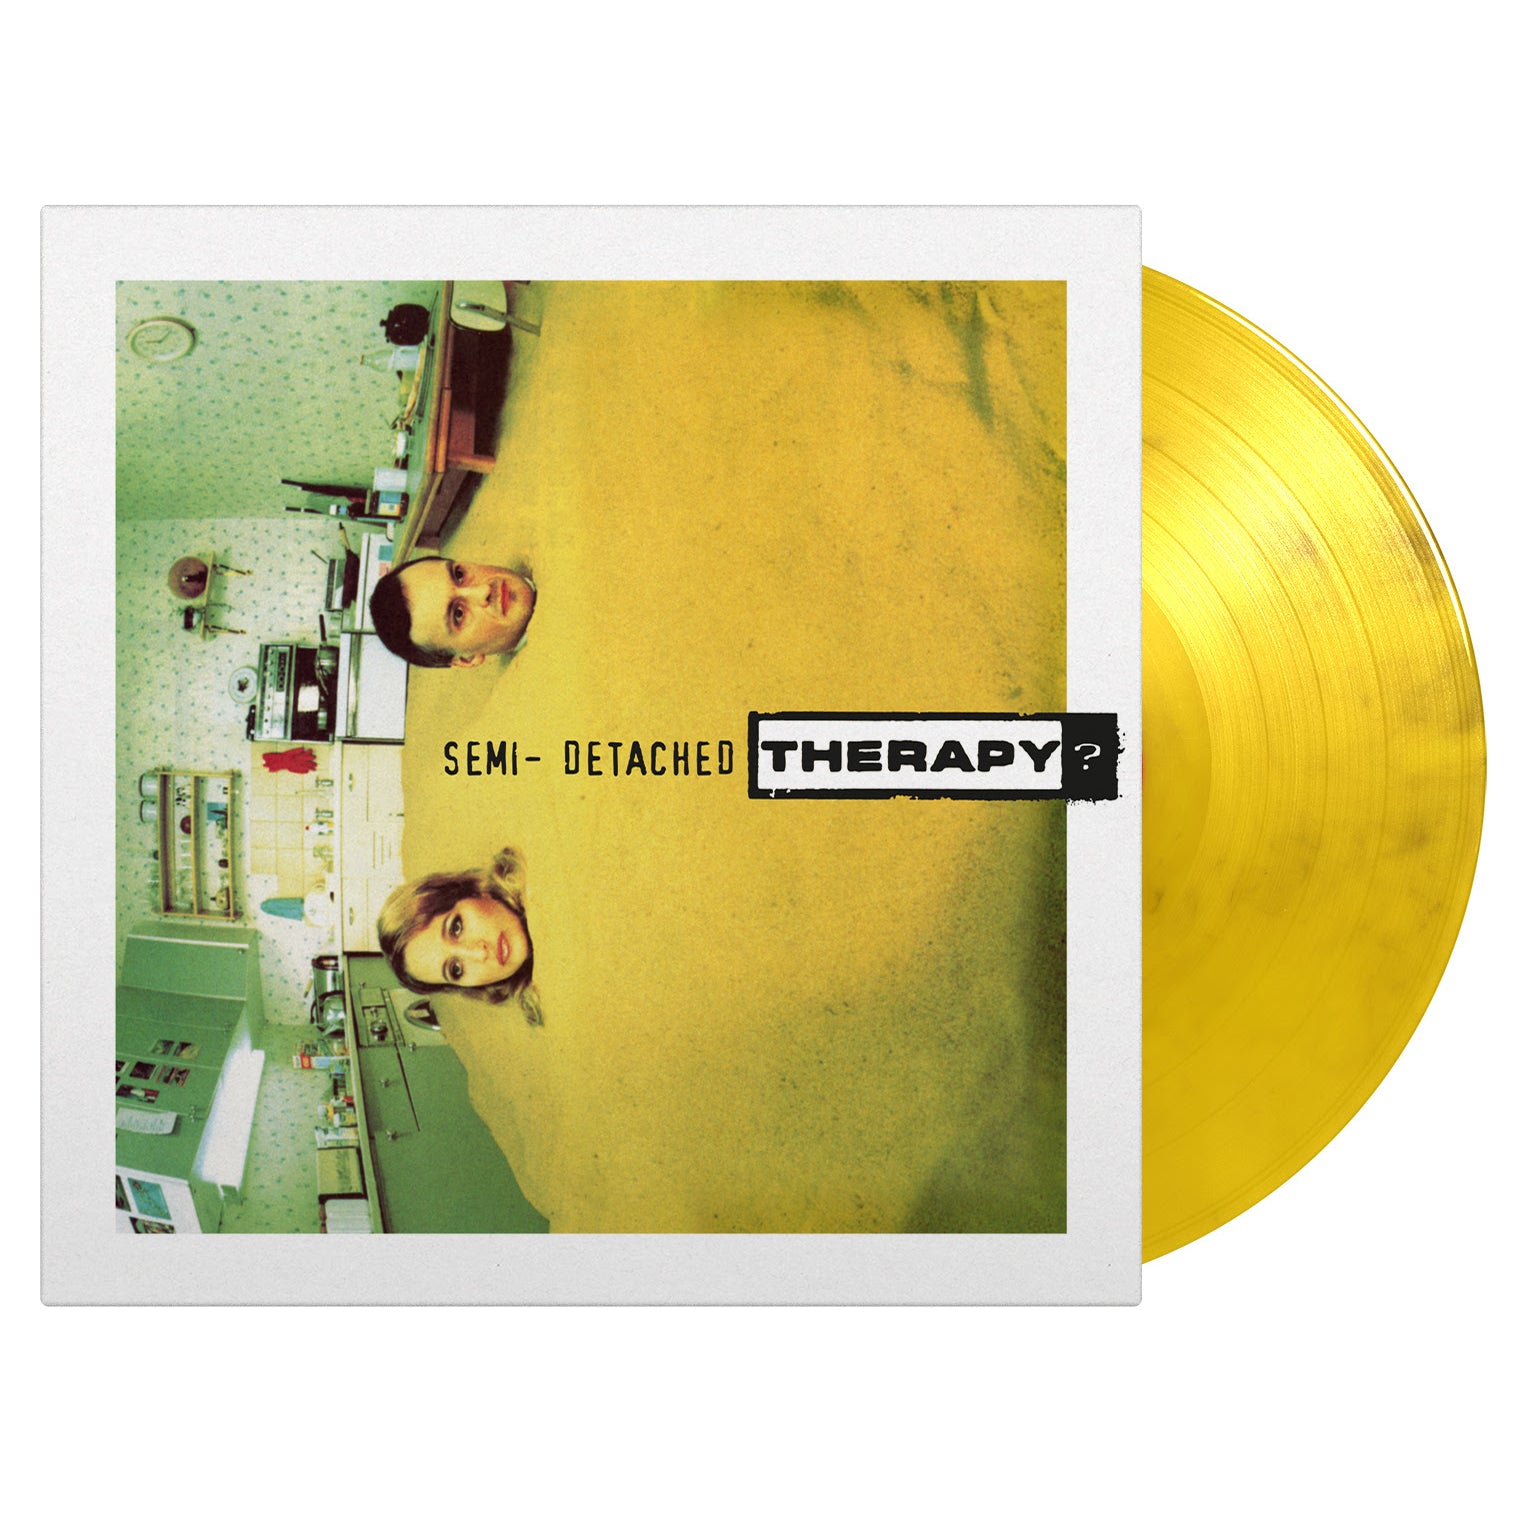 THERAPY? - Semi-Detatched - LP - Yellow & Black Marbled Vinyl [OCT 27]